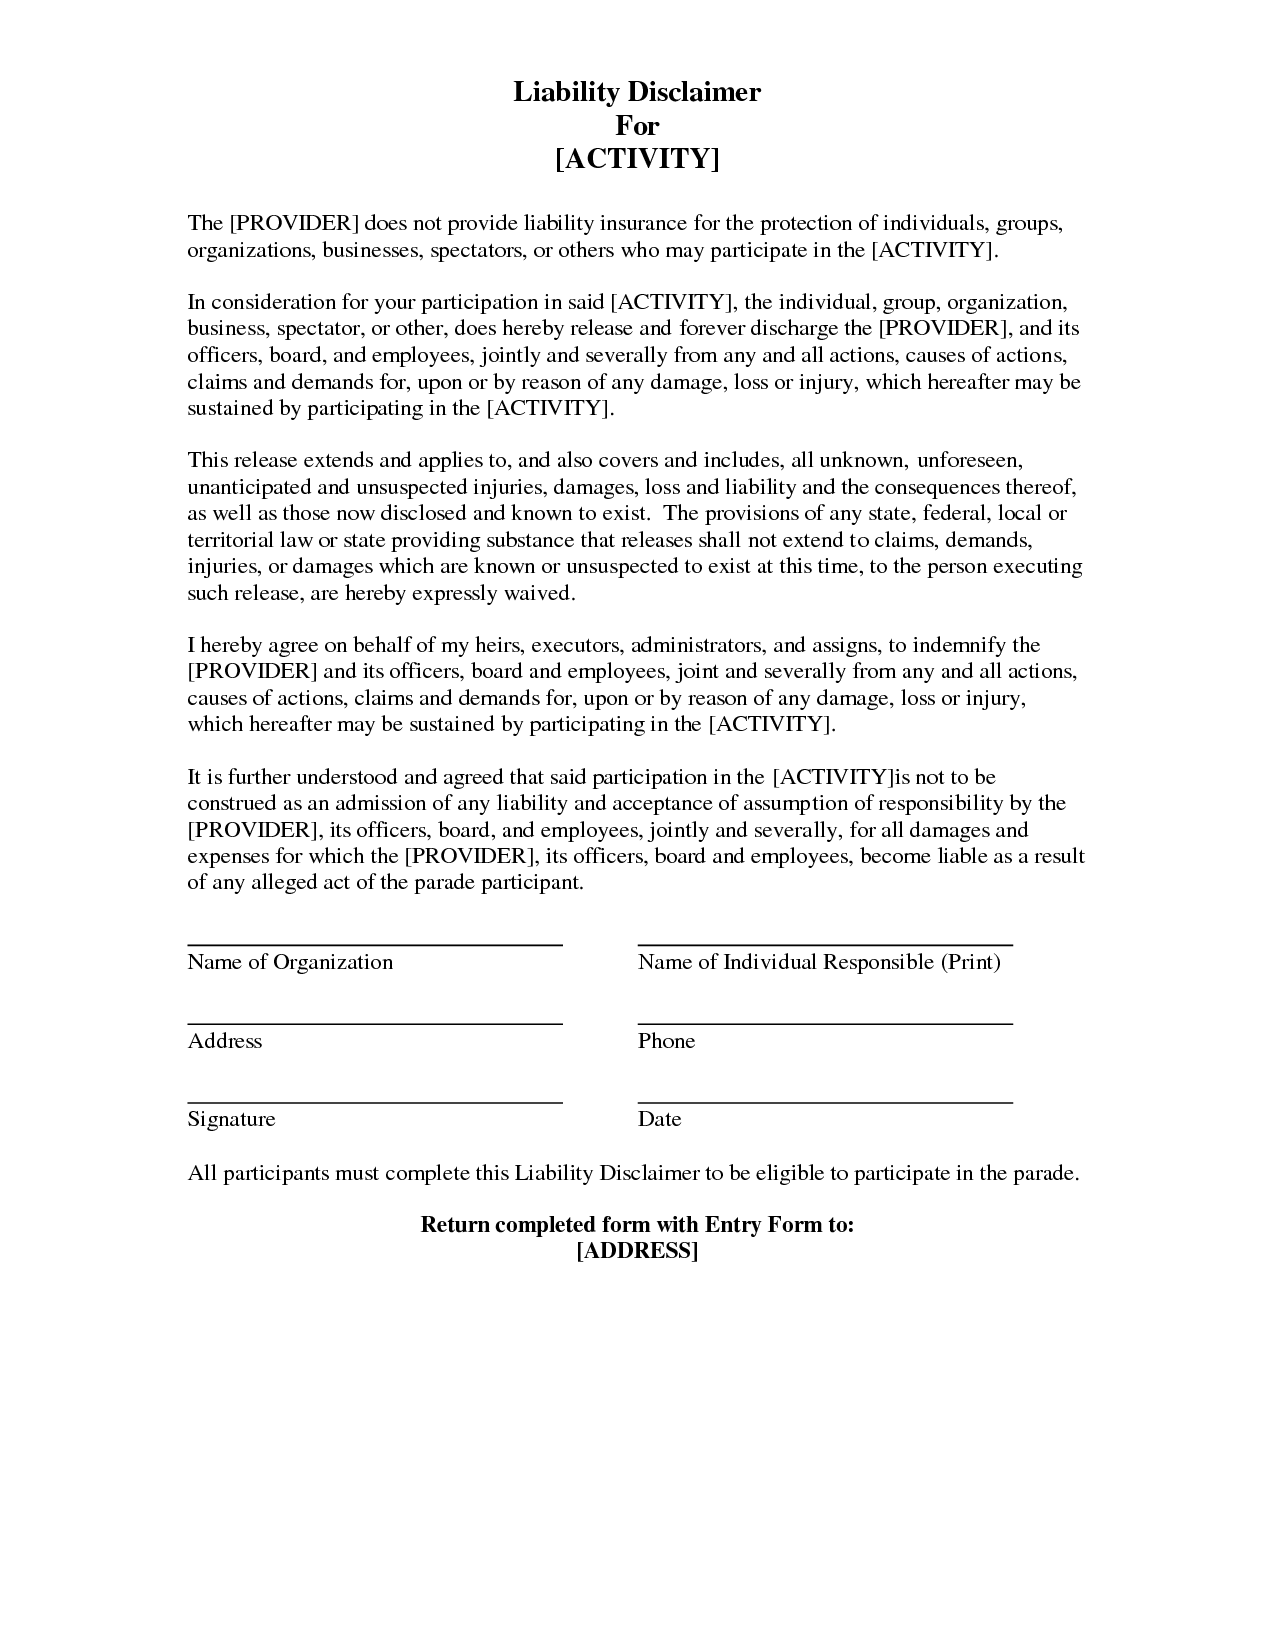 liability-disclaimer-template-free-printable-documents